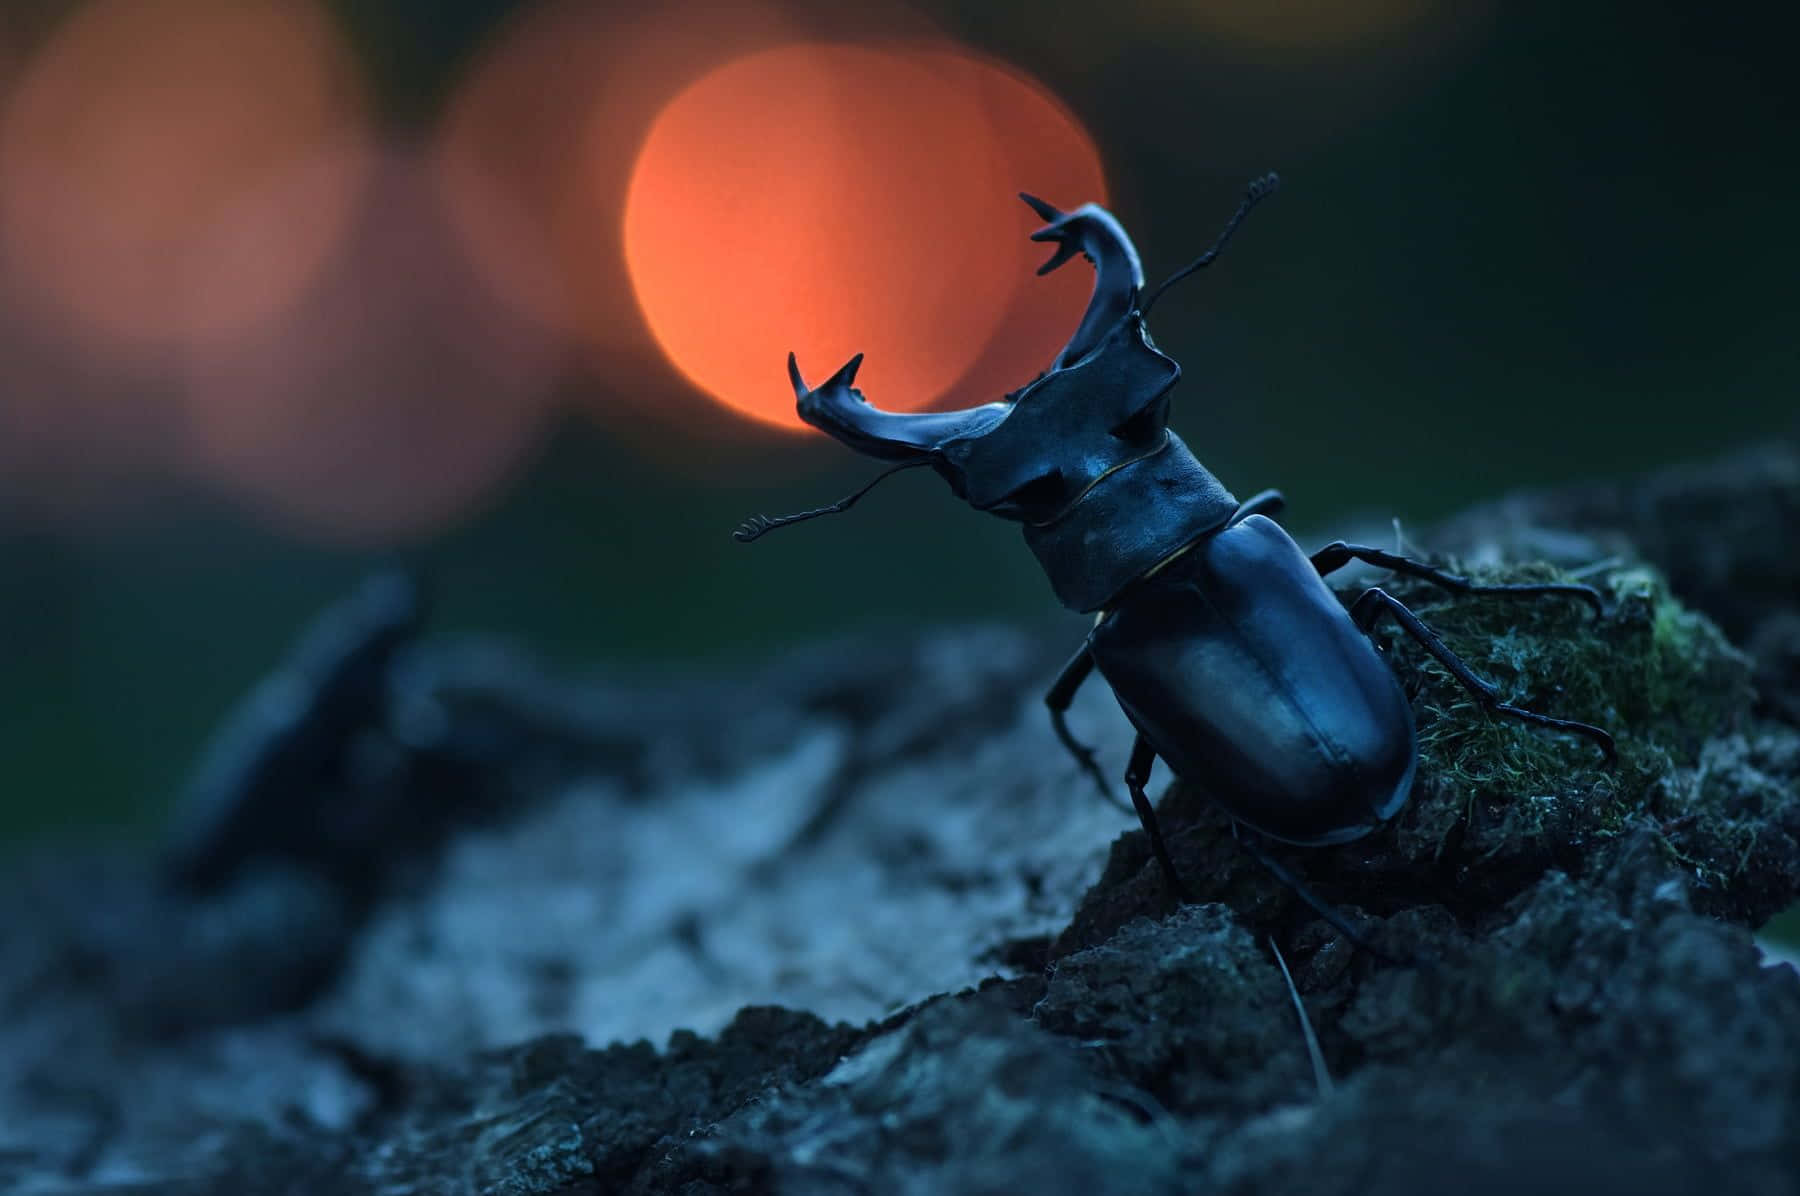 Stag Beetle Sunset Silhouette Wallpaper